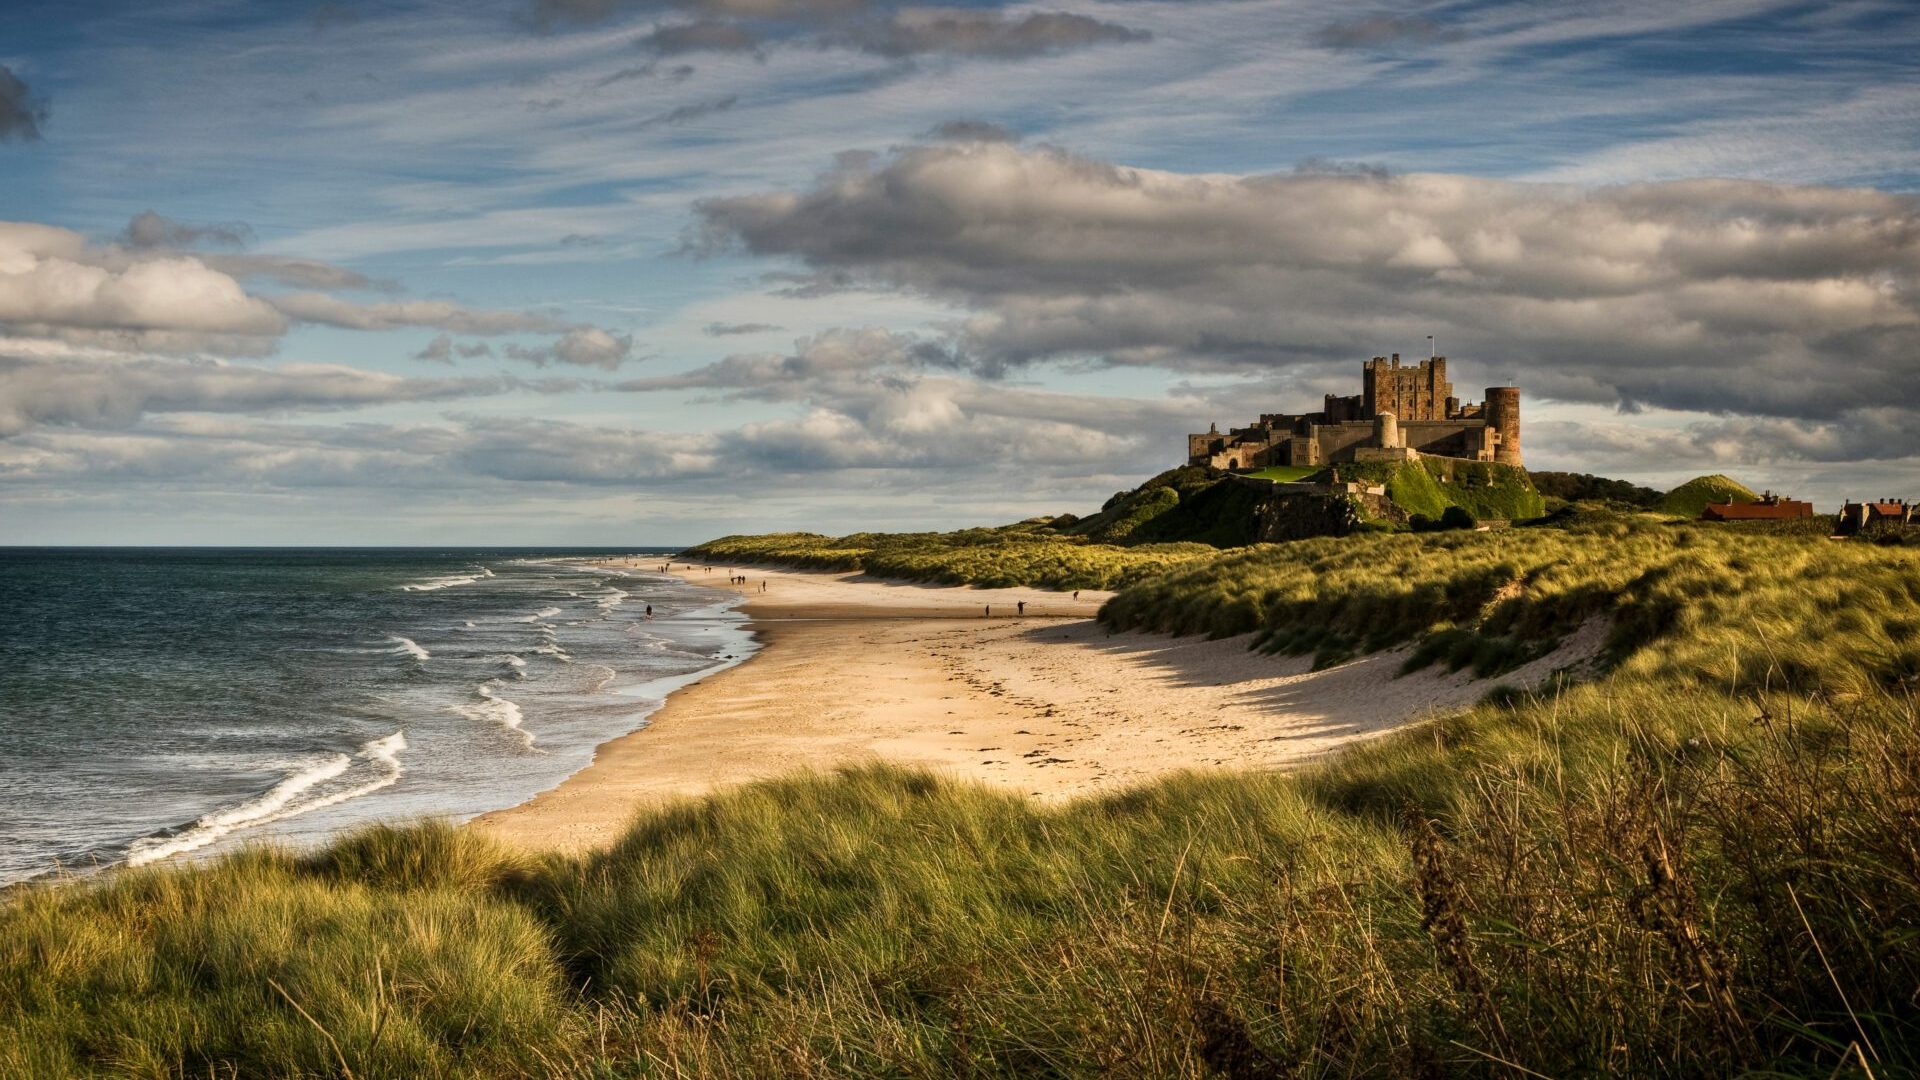 Late Afternoon Light Illuminates The Castle And Beach At Bamburg